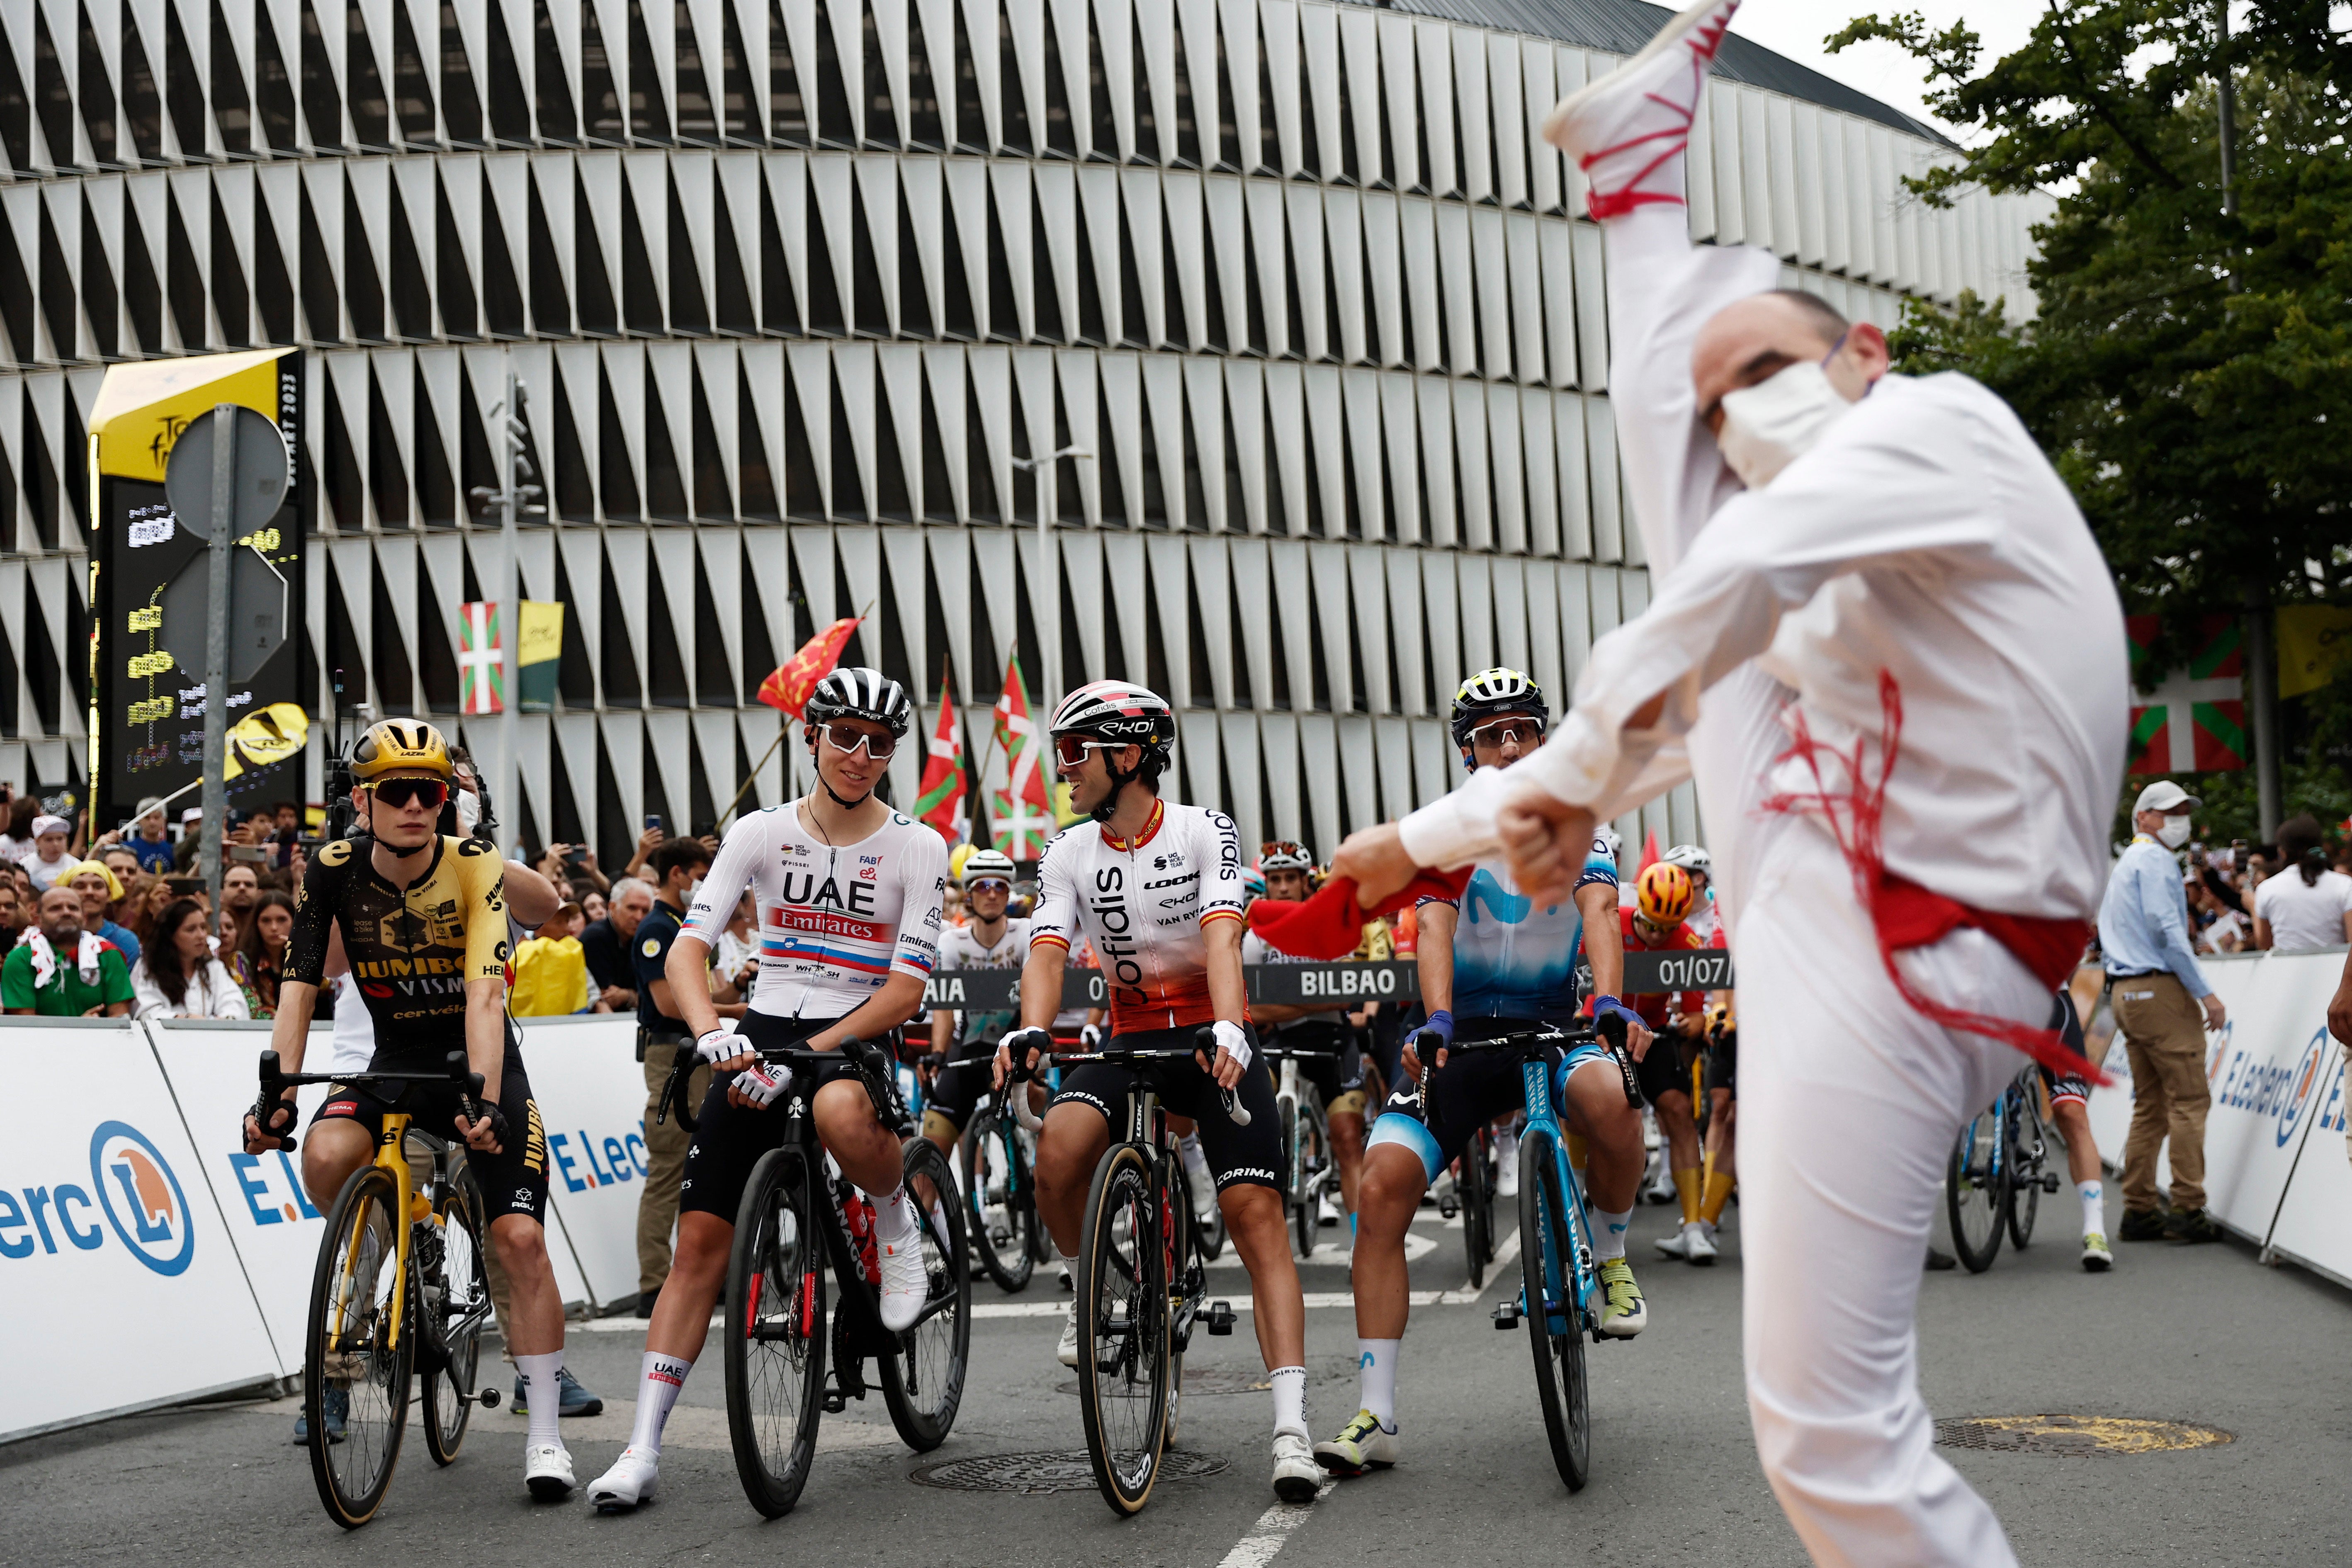 A dancer performs before the start of the Tour de France